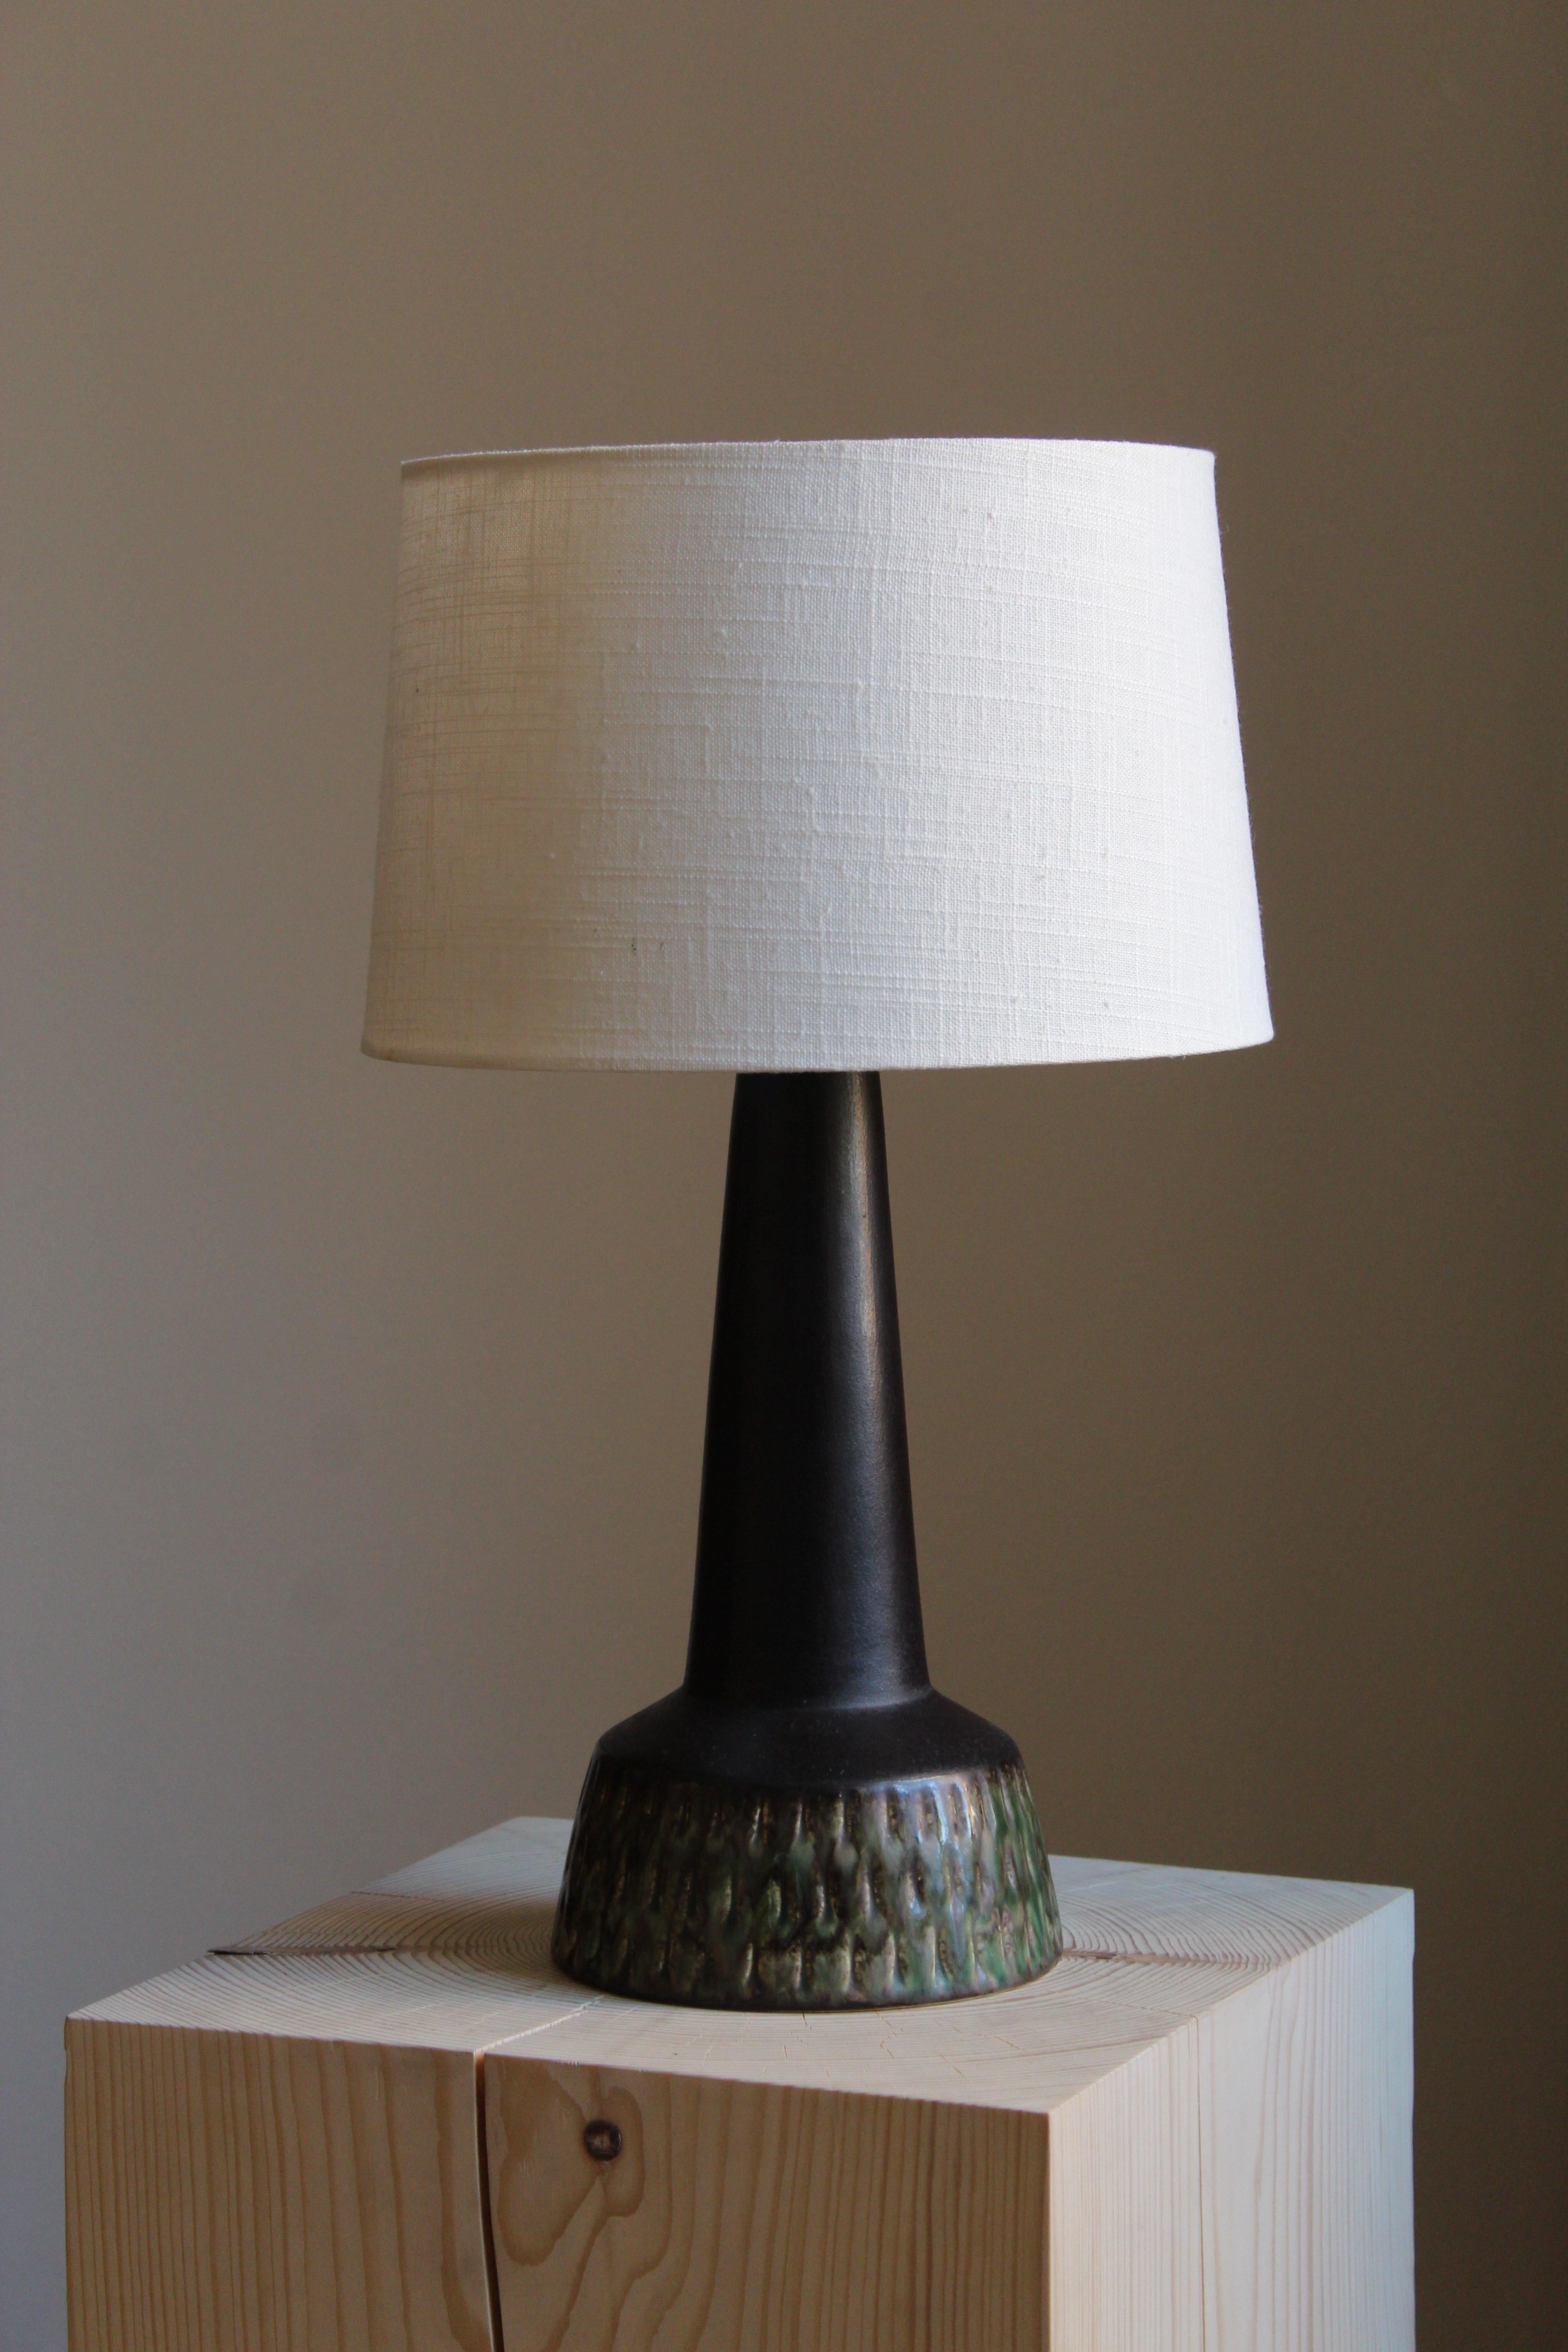 A modernist table lamp. Designed and produced in Denmark, 1960s. Unsigned. 

Sold without lampshade.

Glaze features black-green colors.

Other designers of the period include Axel Salto, Arne Bang, Carl-Harry Stålhane, Gunnar Nylund and Wilhelm